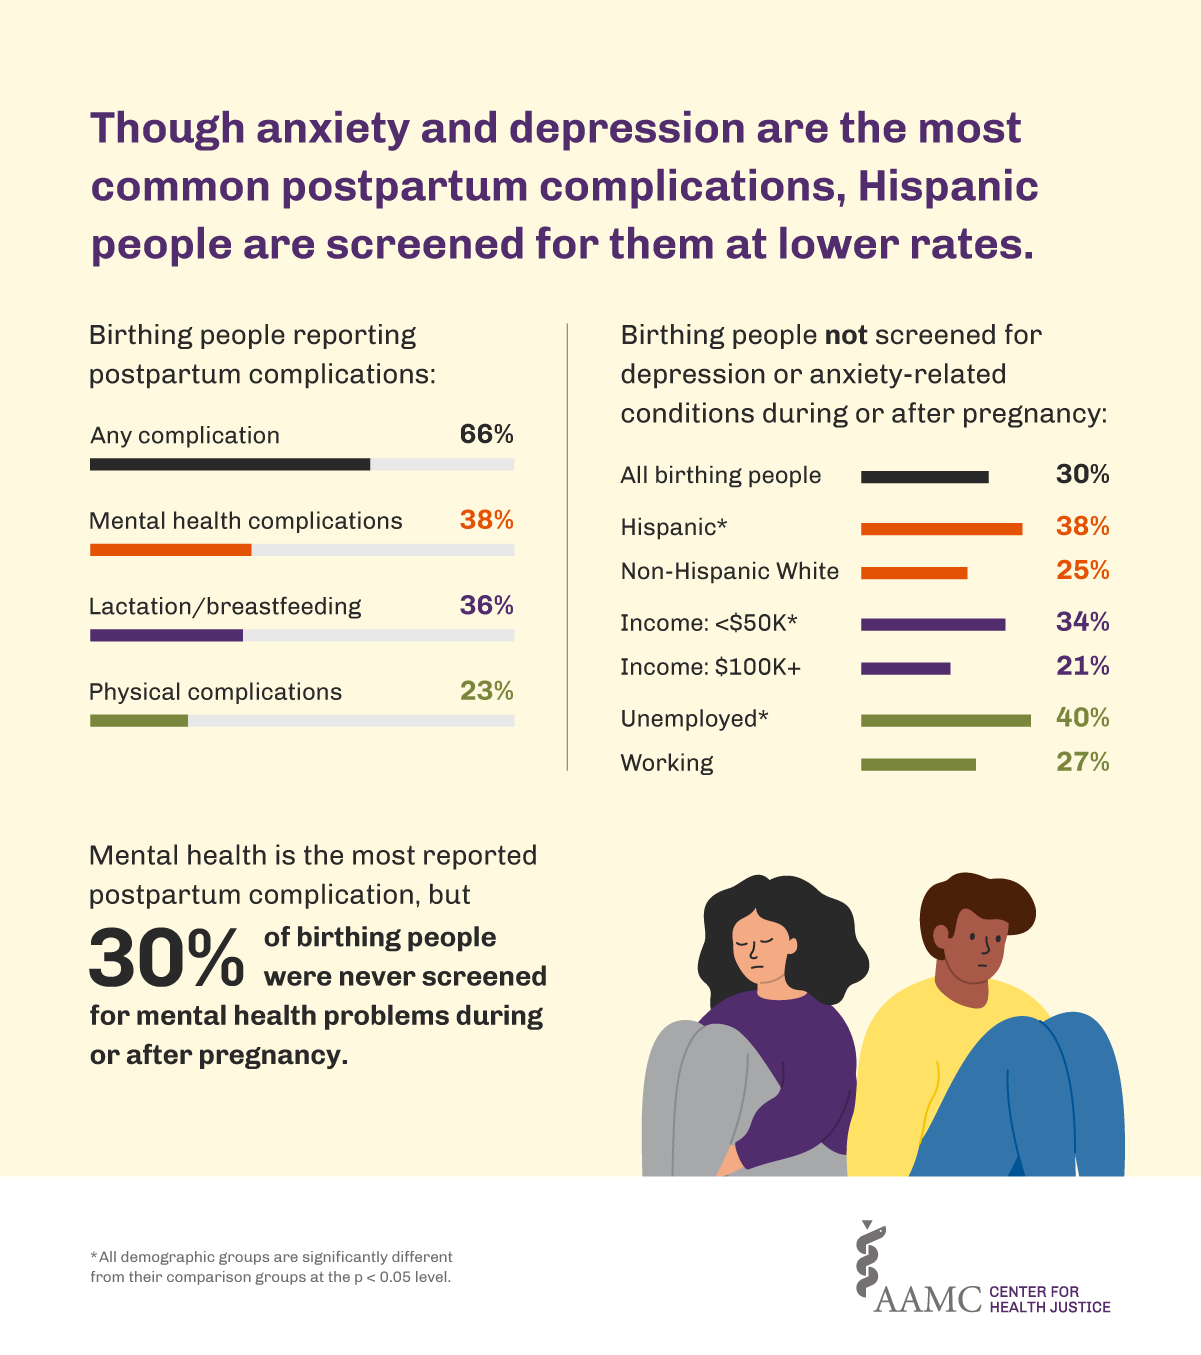 Though anxiety and depression are the most common postpartum complications, Hispanic people are screened for them at lower rates.